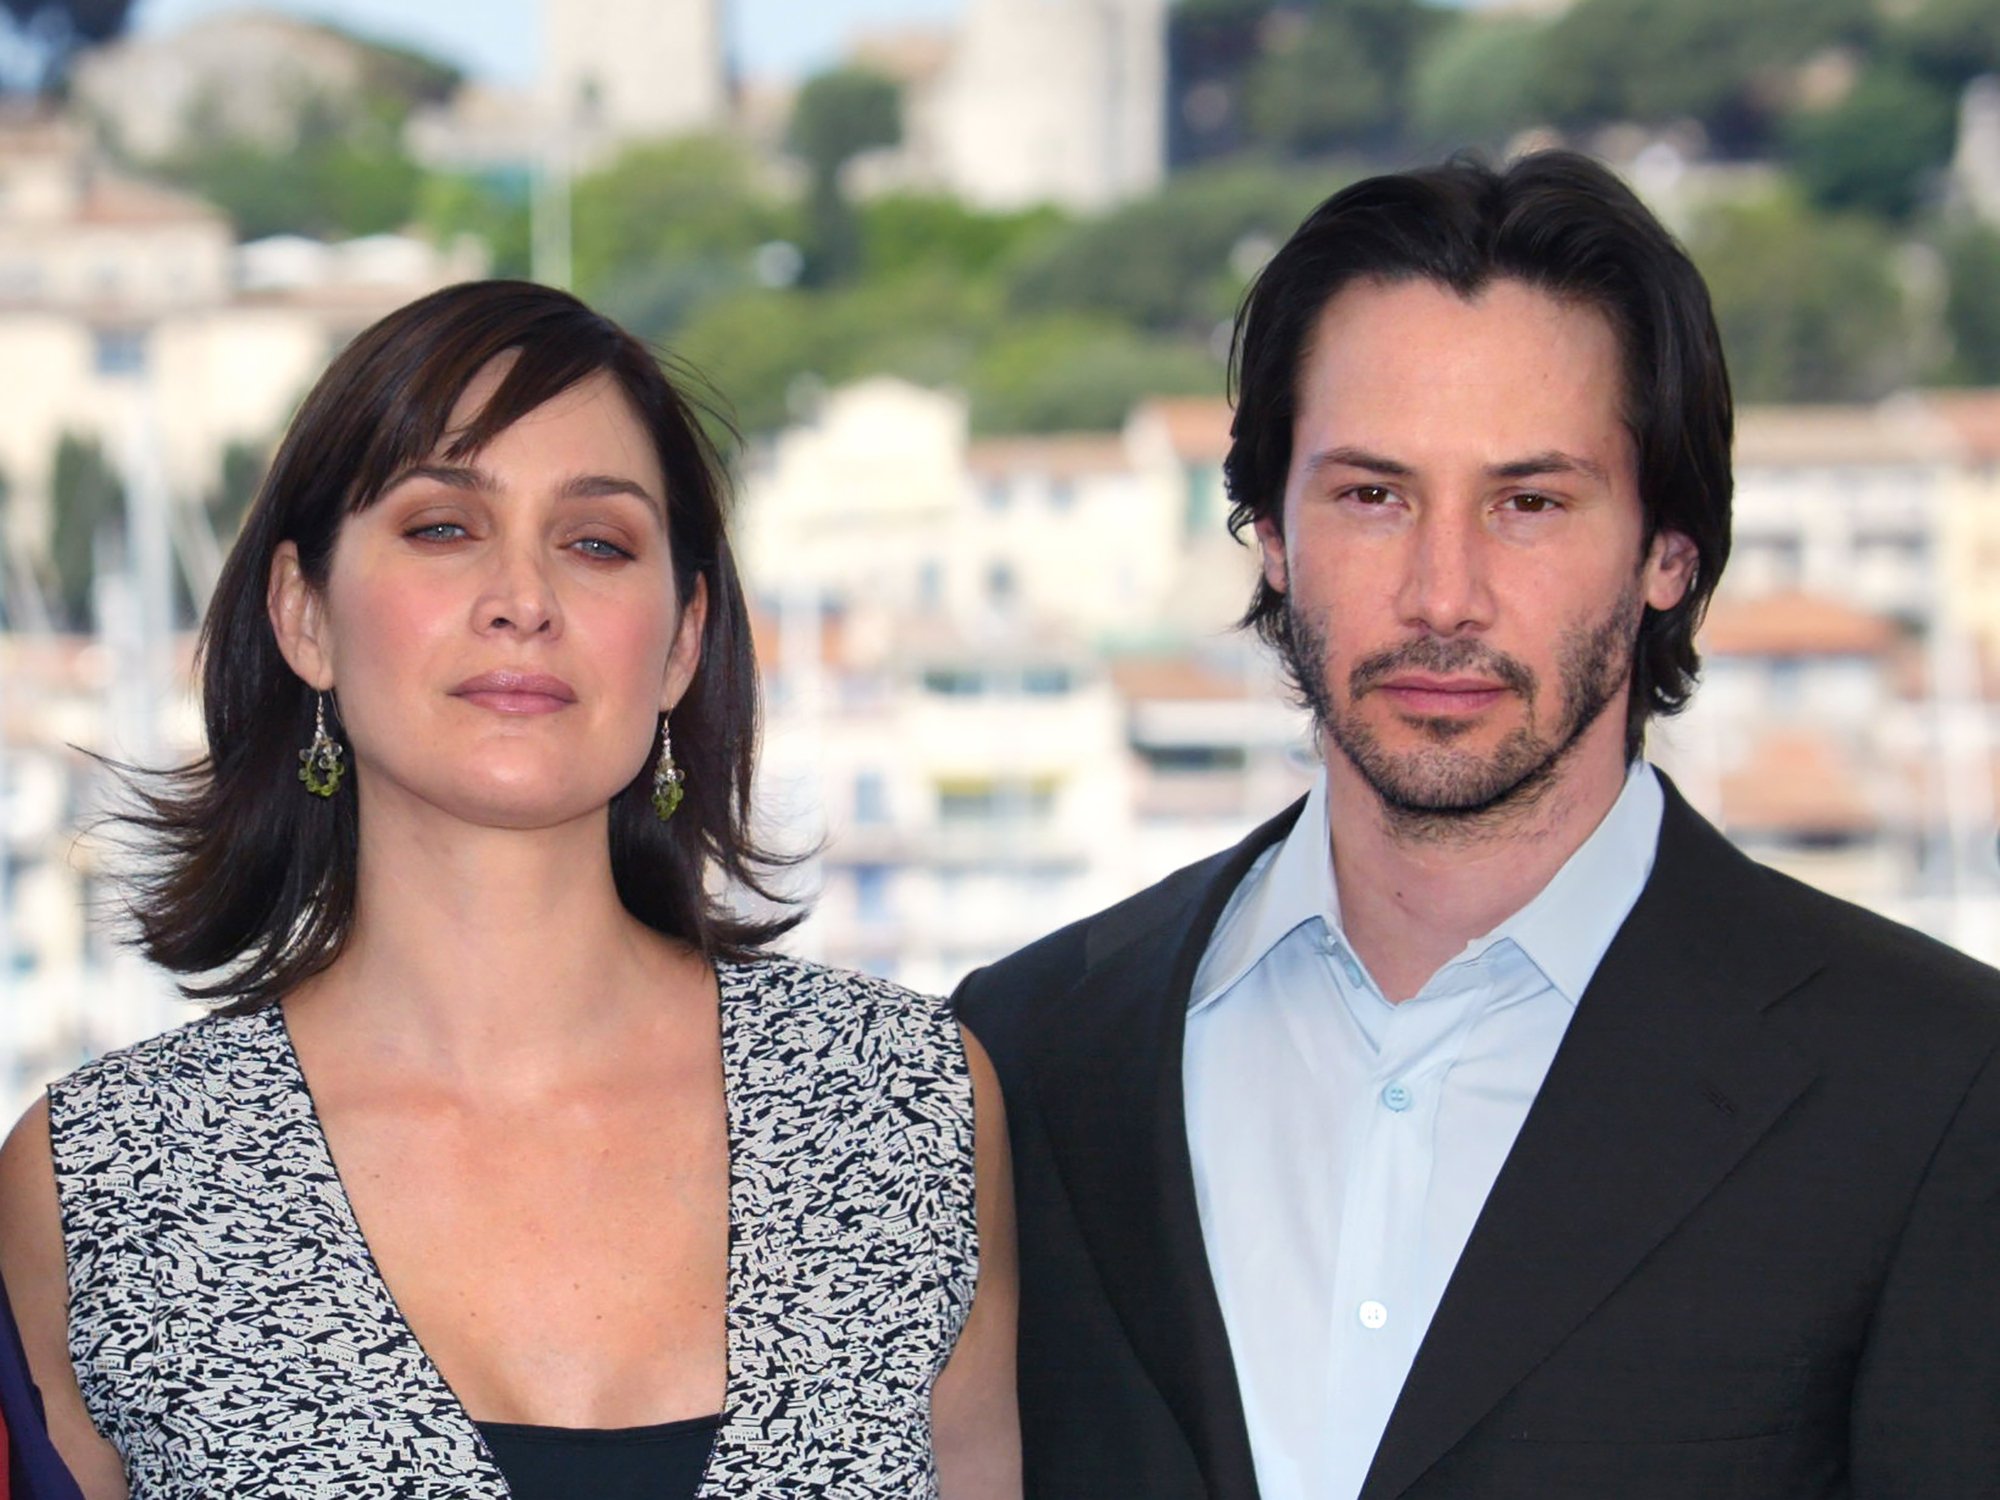 'The Matrix Resurrections' Carrie-Anne Moss and Keanu Reeves during the 56th Cannes film festival in front of white buildings